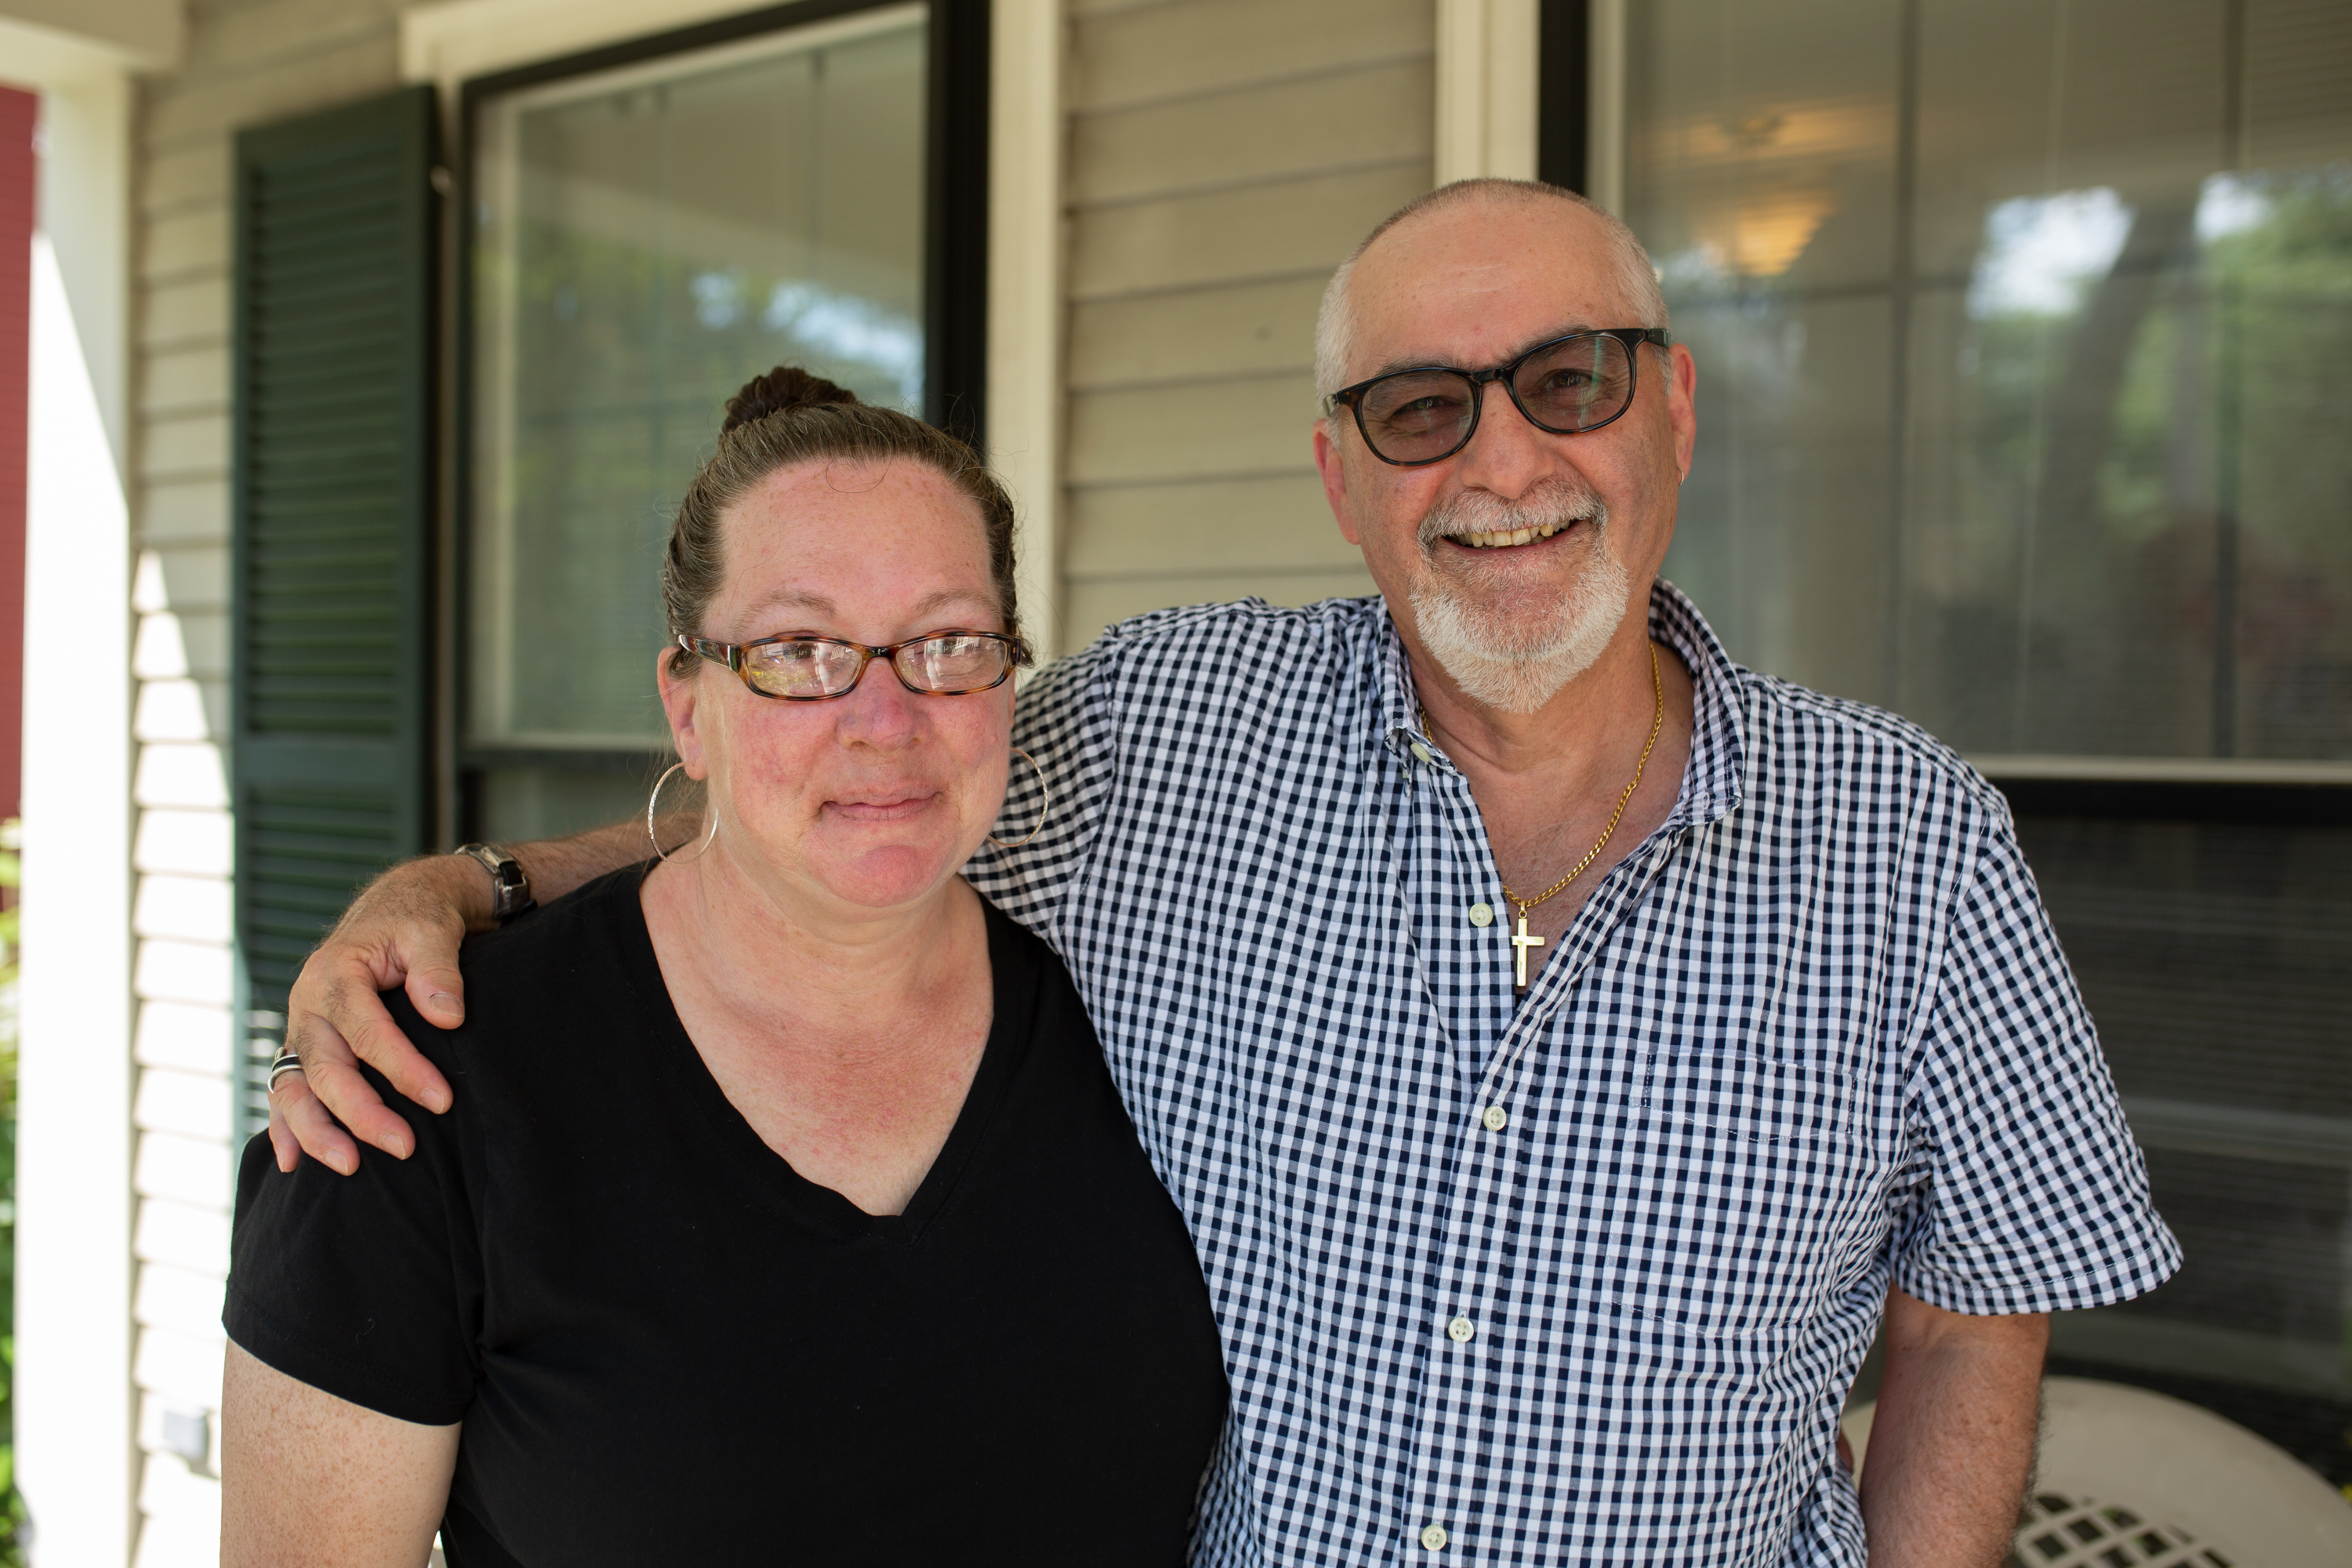 Gene Ferraro stands with his arm around Maryann Broxton on the front porch of the Center for the Adult Learner